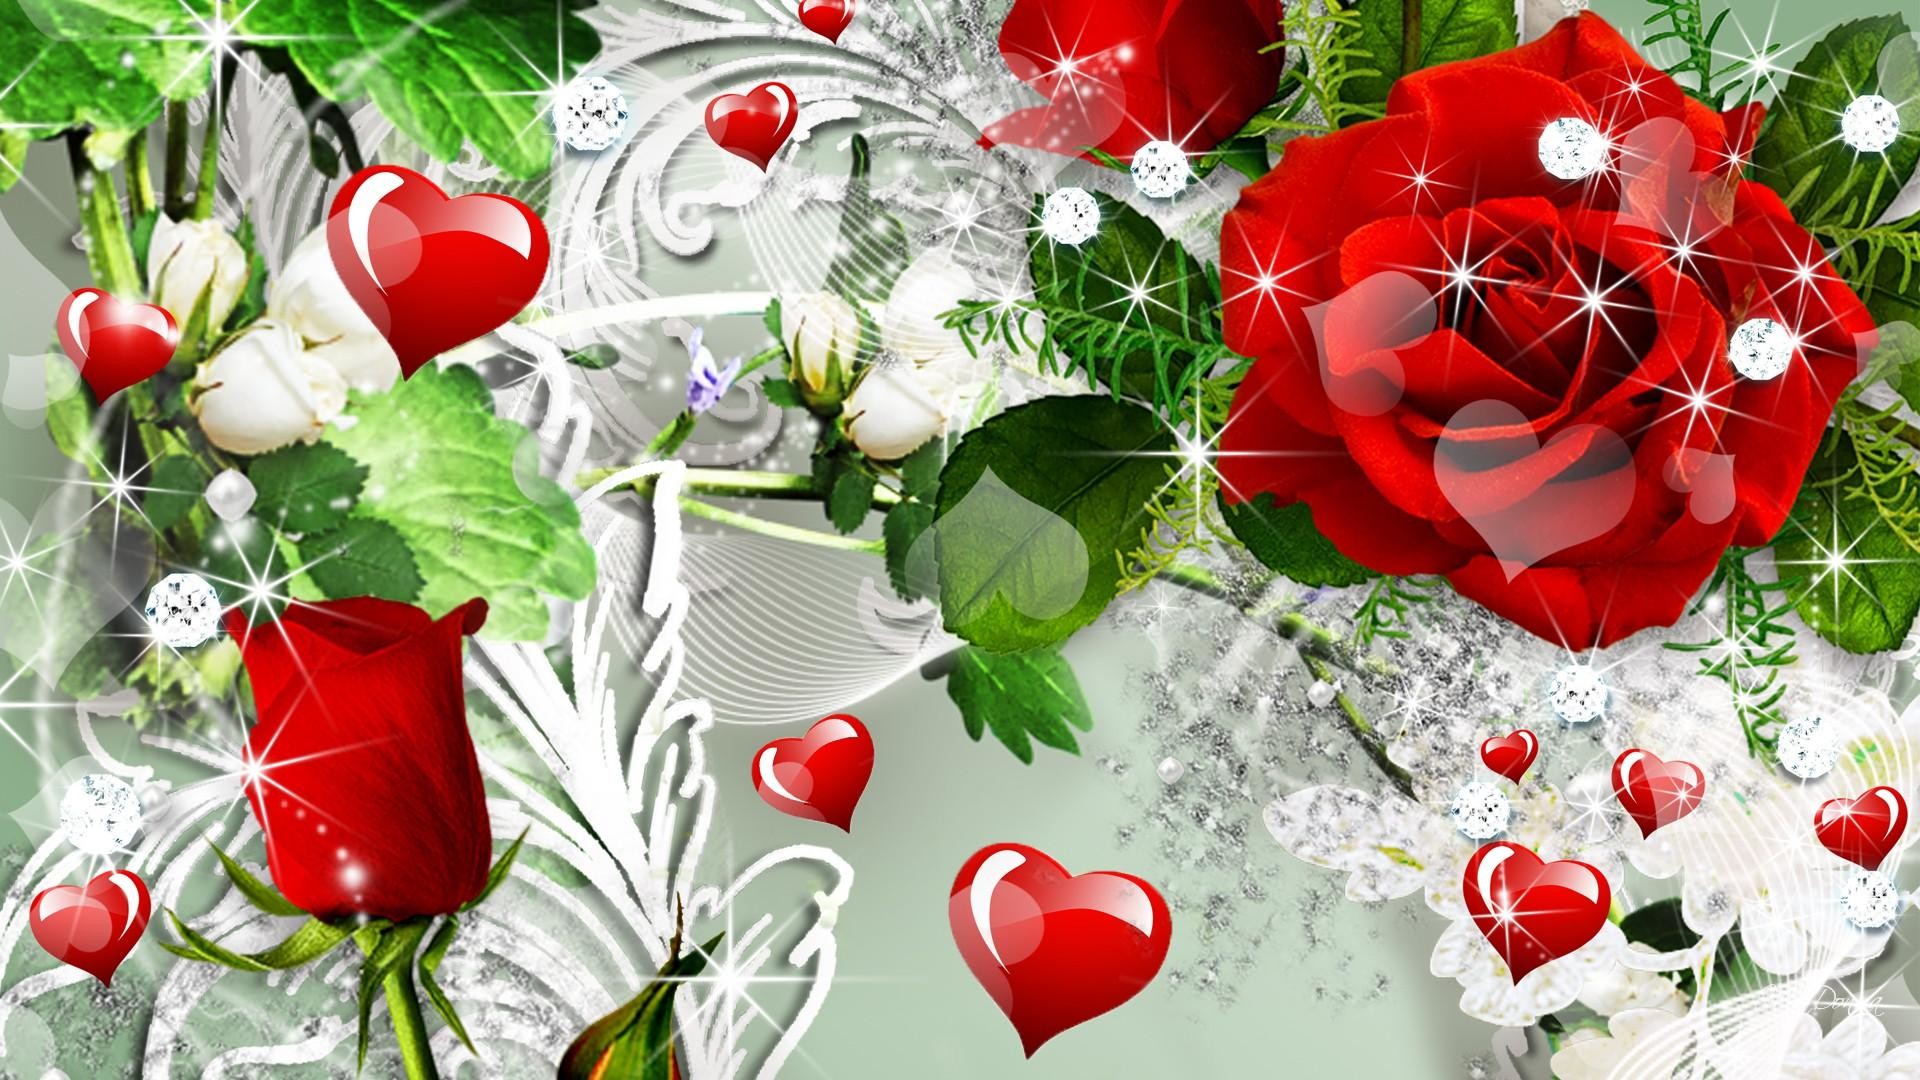 1920x1080 ... Red-heart-with-pink-roses-wallpaper ...